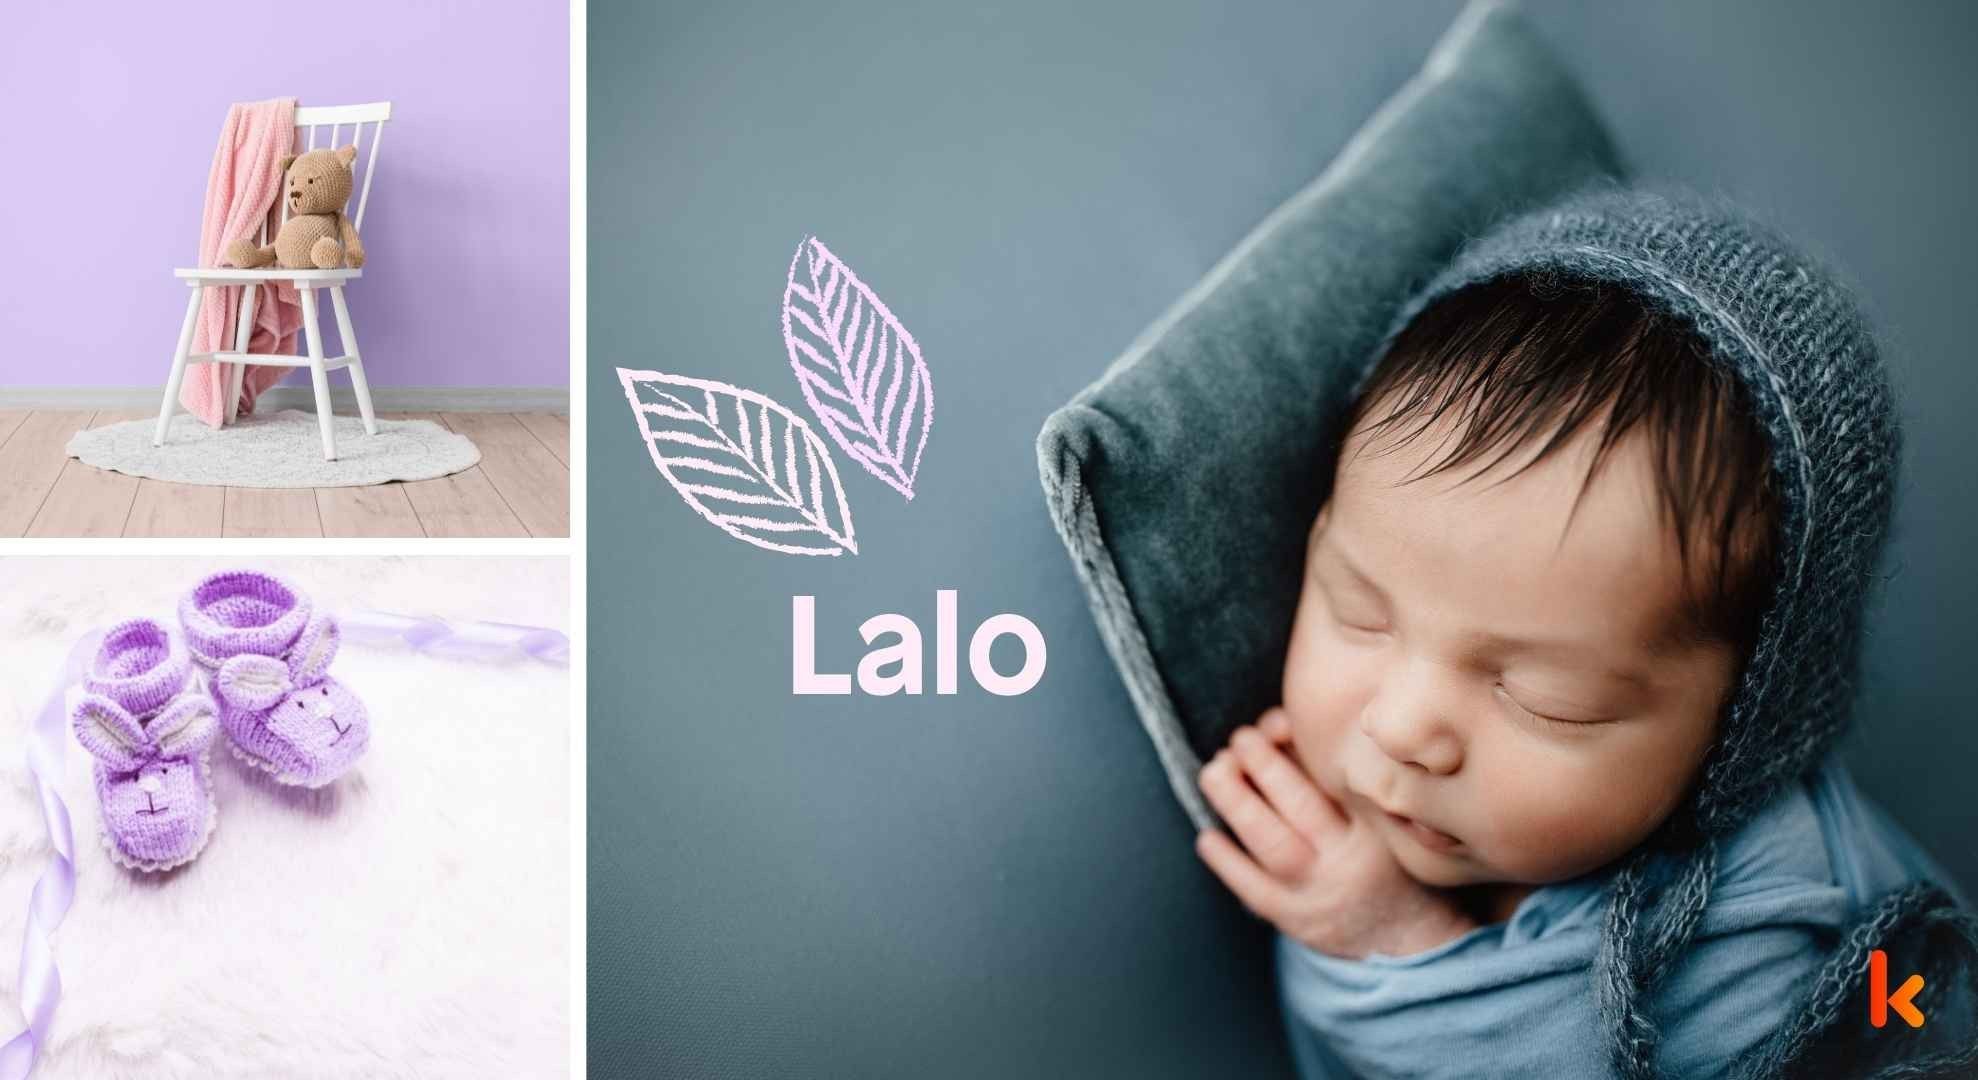 Meaning of the name Lalo